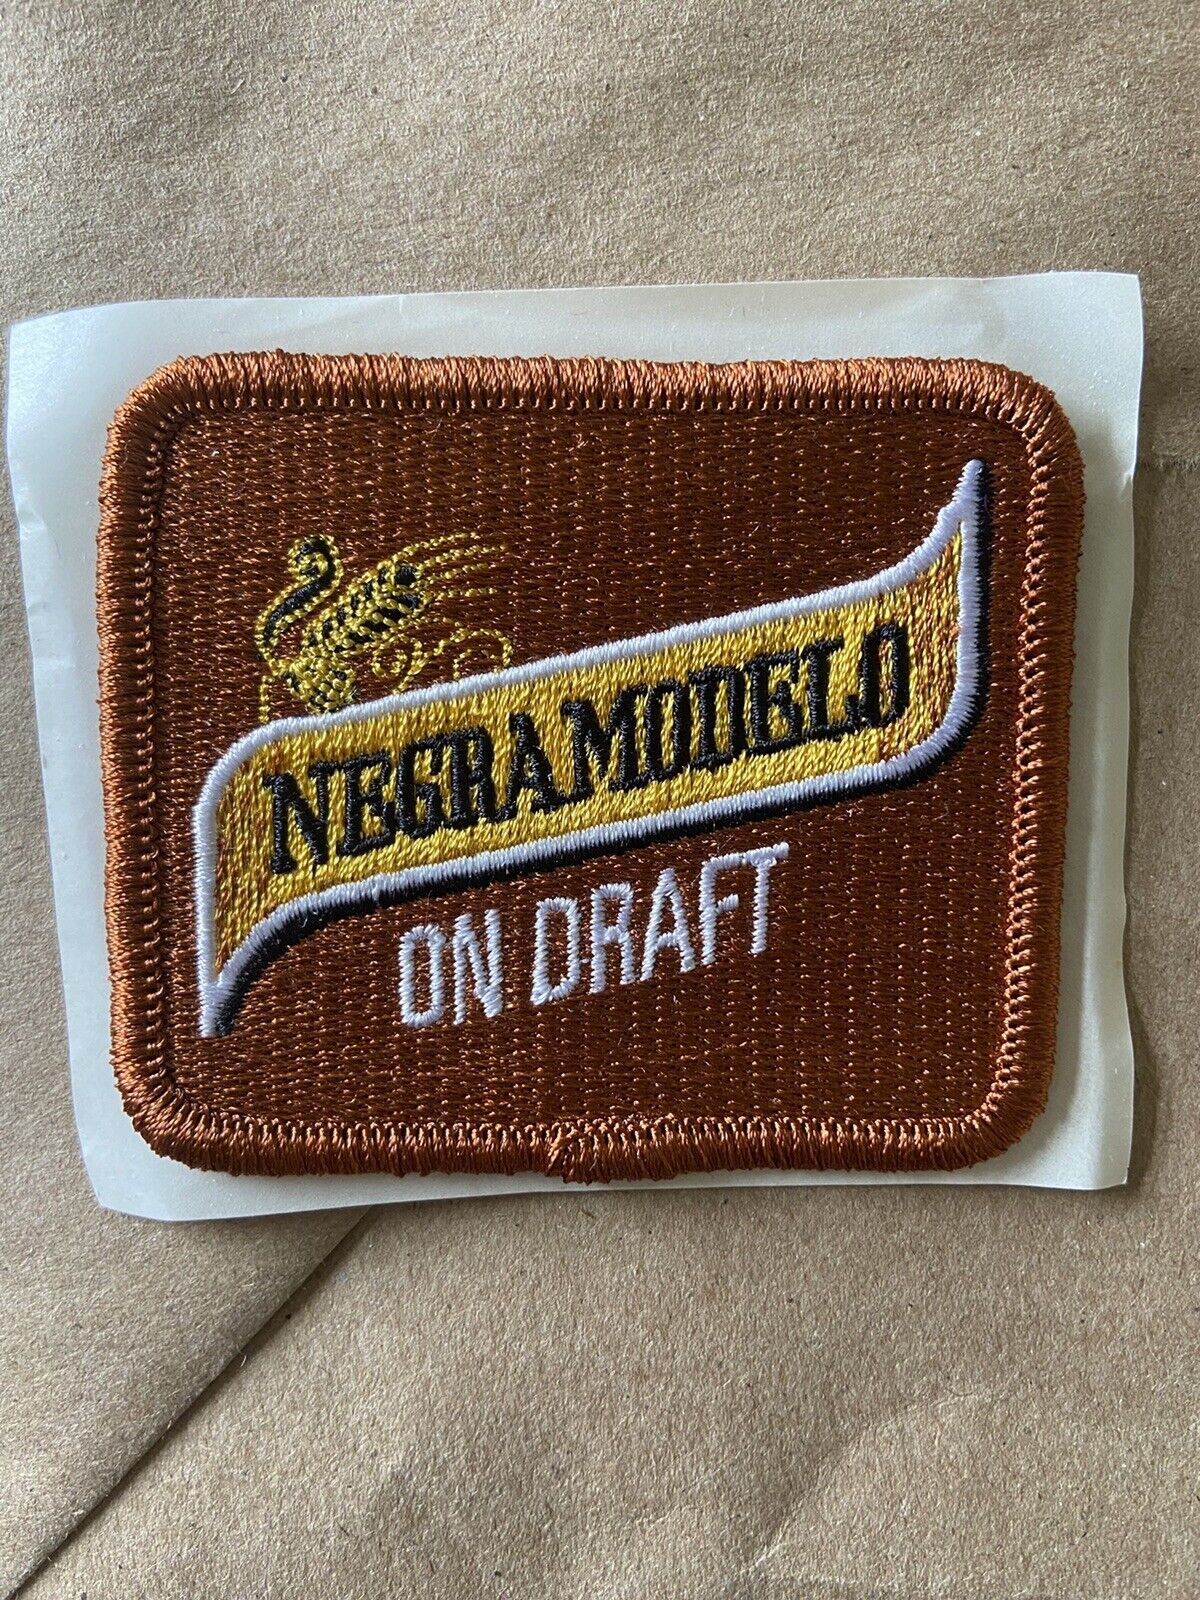 Negra Modelo Cerveza Patch Beer Patch With Adhesive